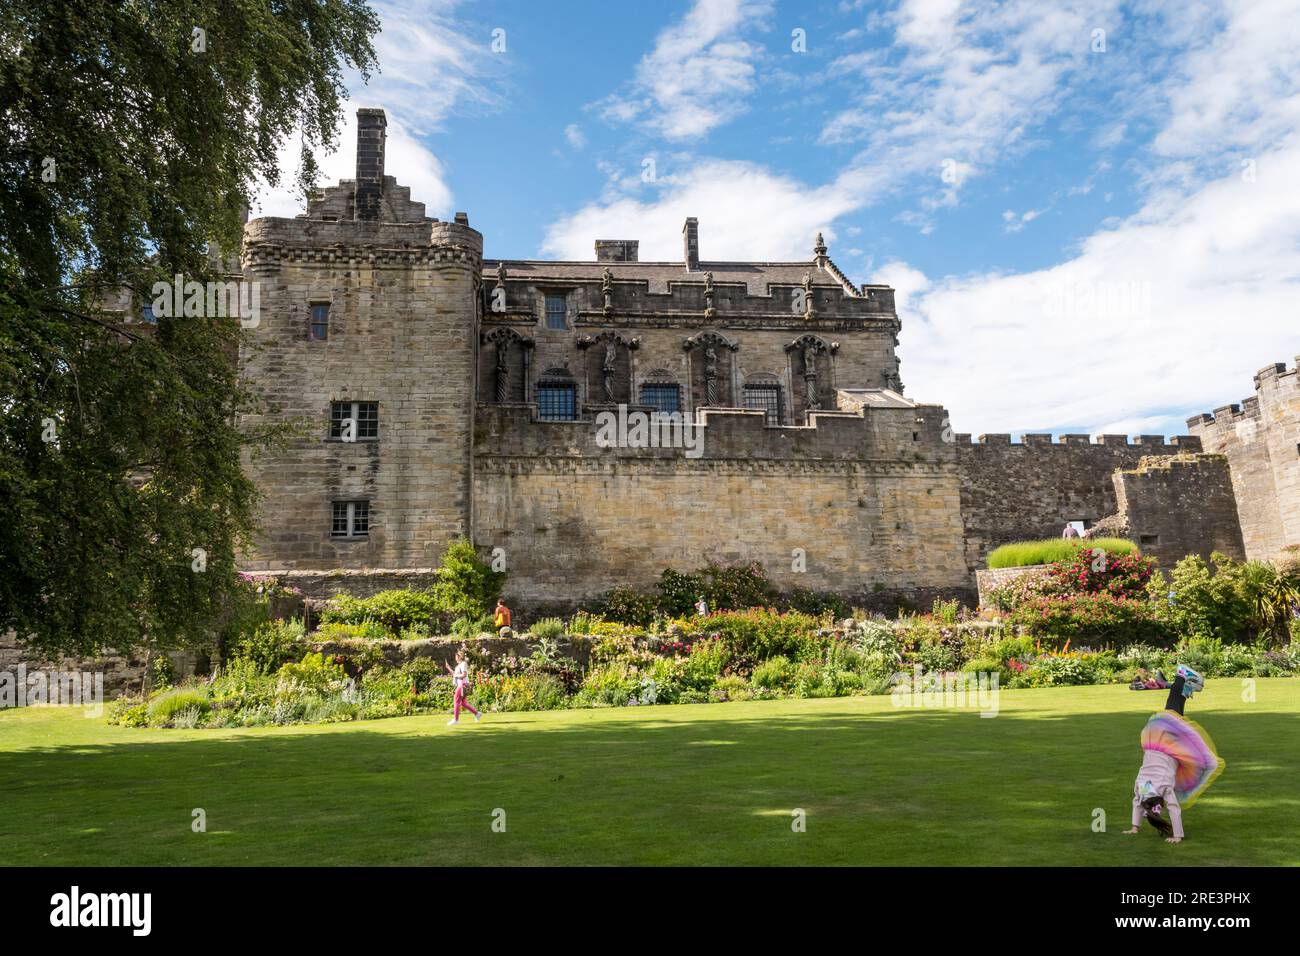 The Queen Anne Garden at Stirling Castle dates from the 1400s. The gardens were transformed into a bowlng green in the early C17th. Stock Photo